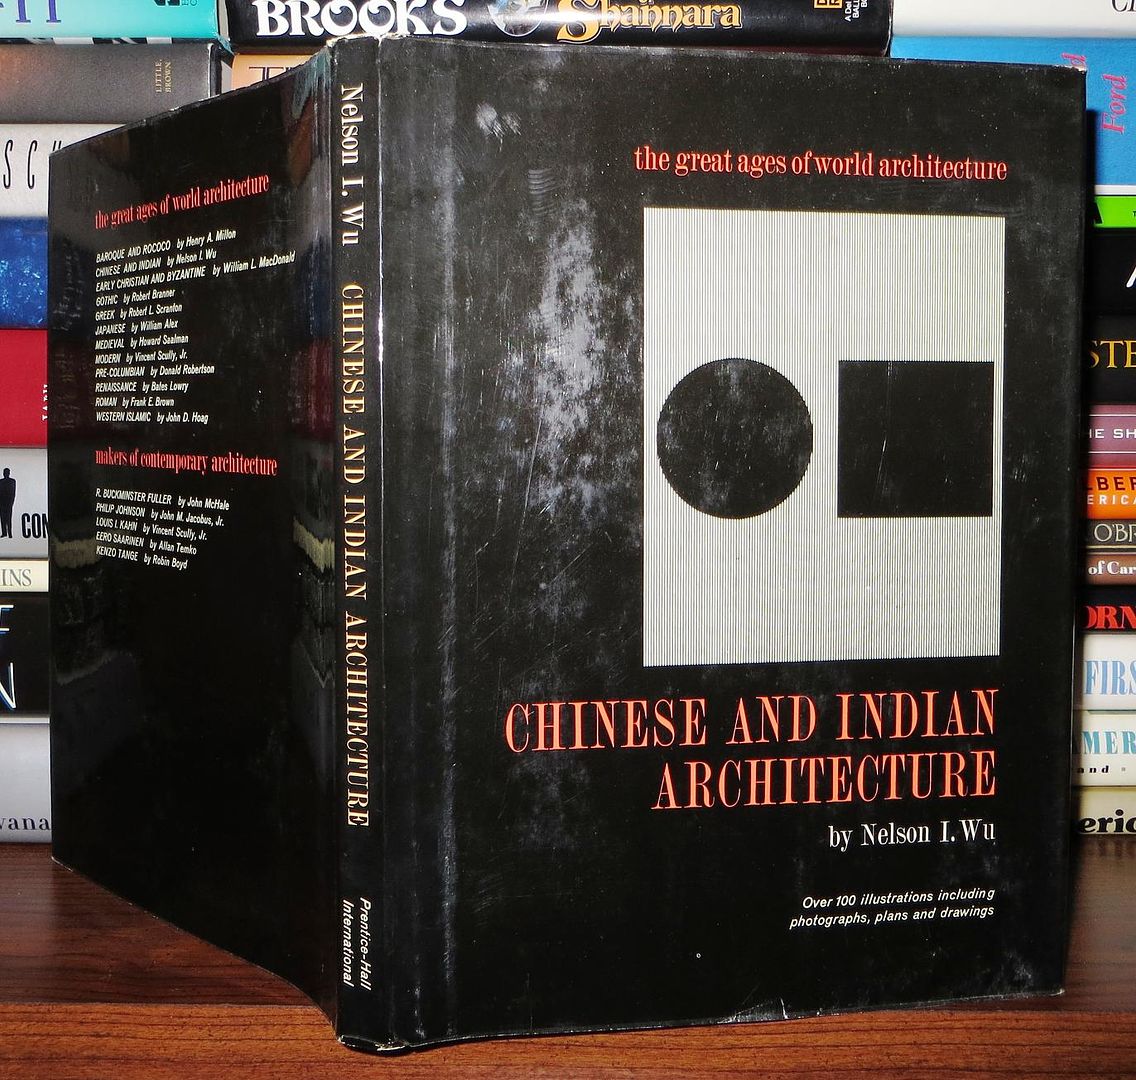 WU, NELSON I. - Chinese and Indian Architecture